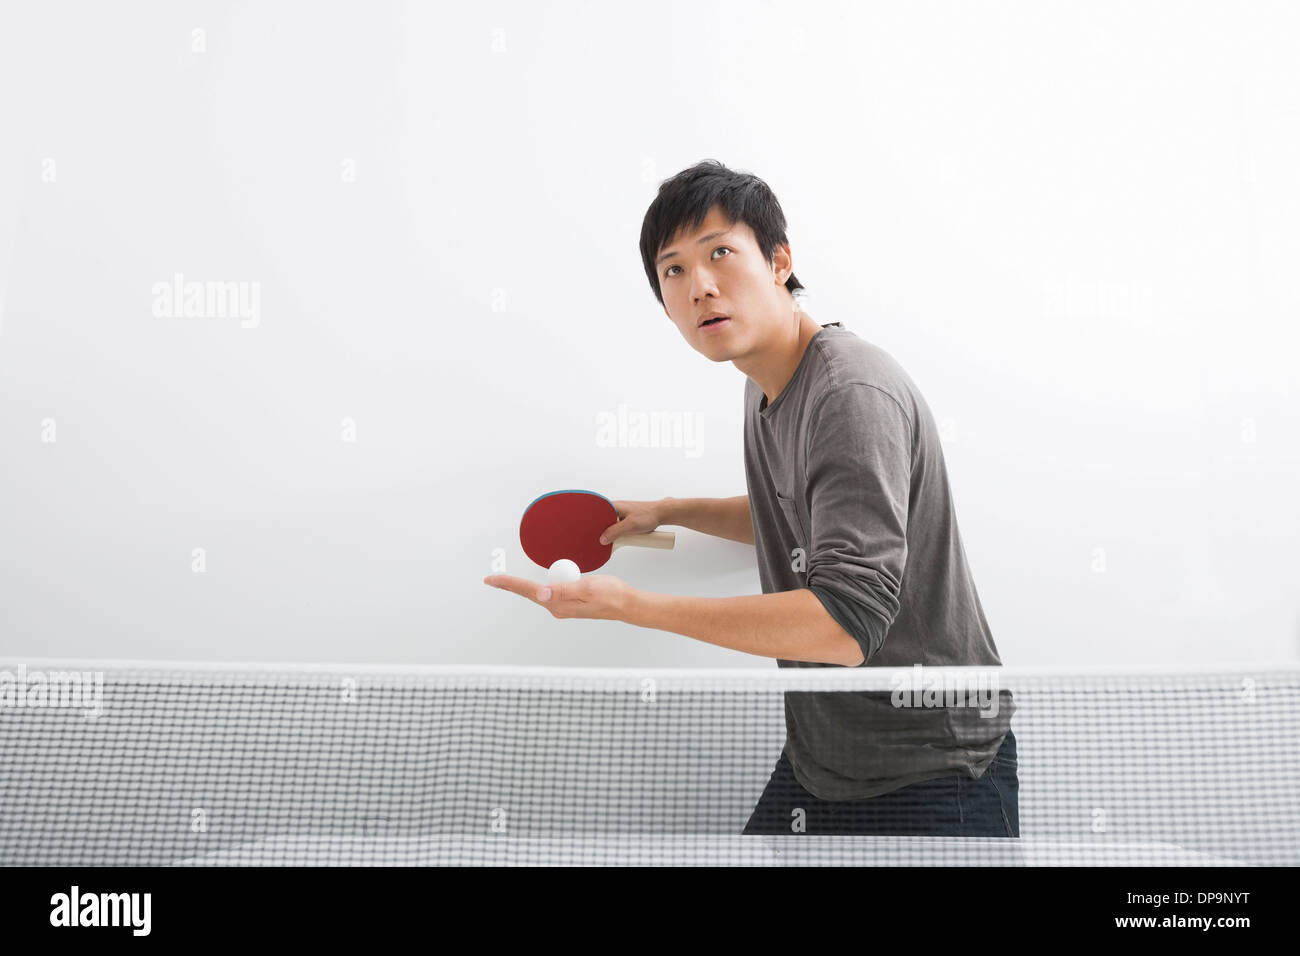 Bel asiatique man playing ping pong Banque D'Images